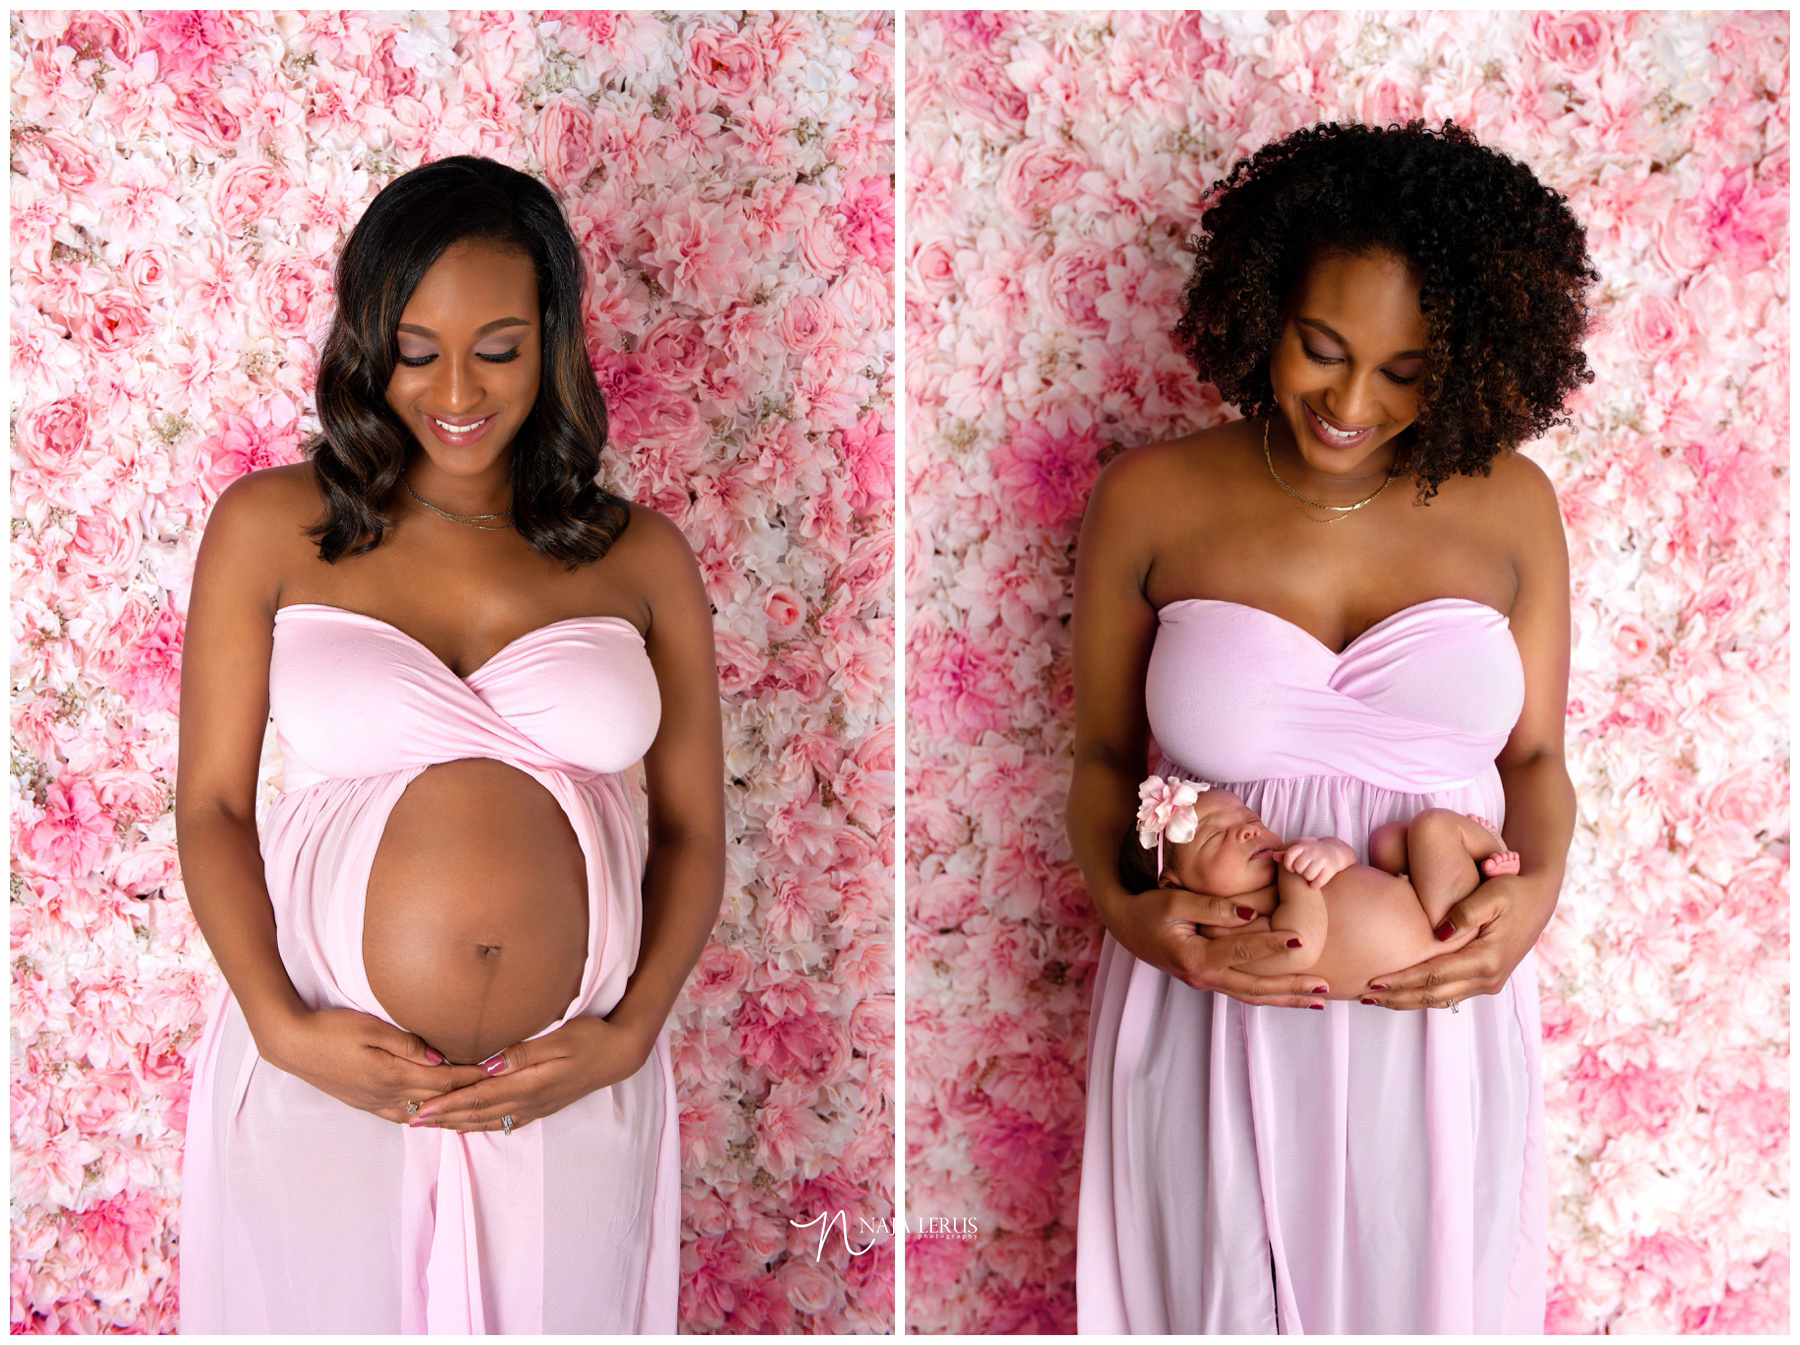 chicago IL before and after pregnancy maternity newborn photo